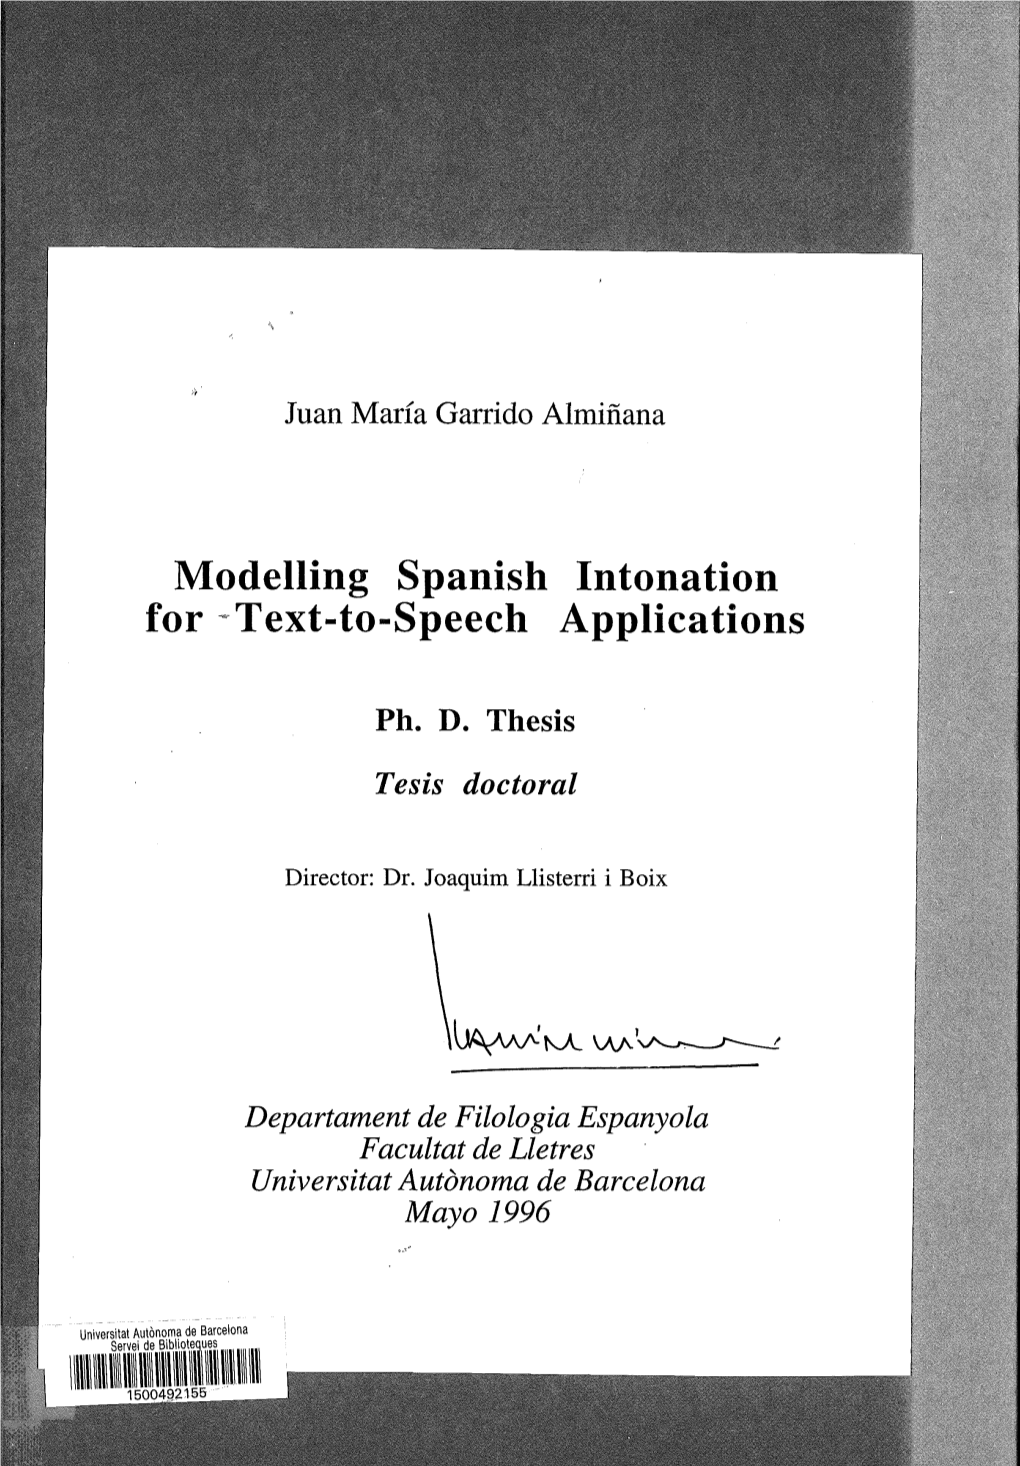 Modelling Spanish Intonation for -Text-To-Speech Applications